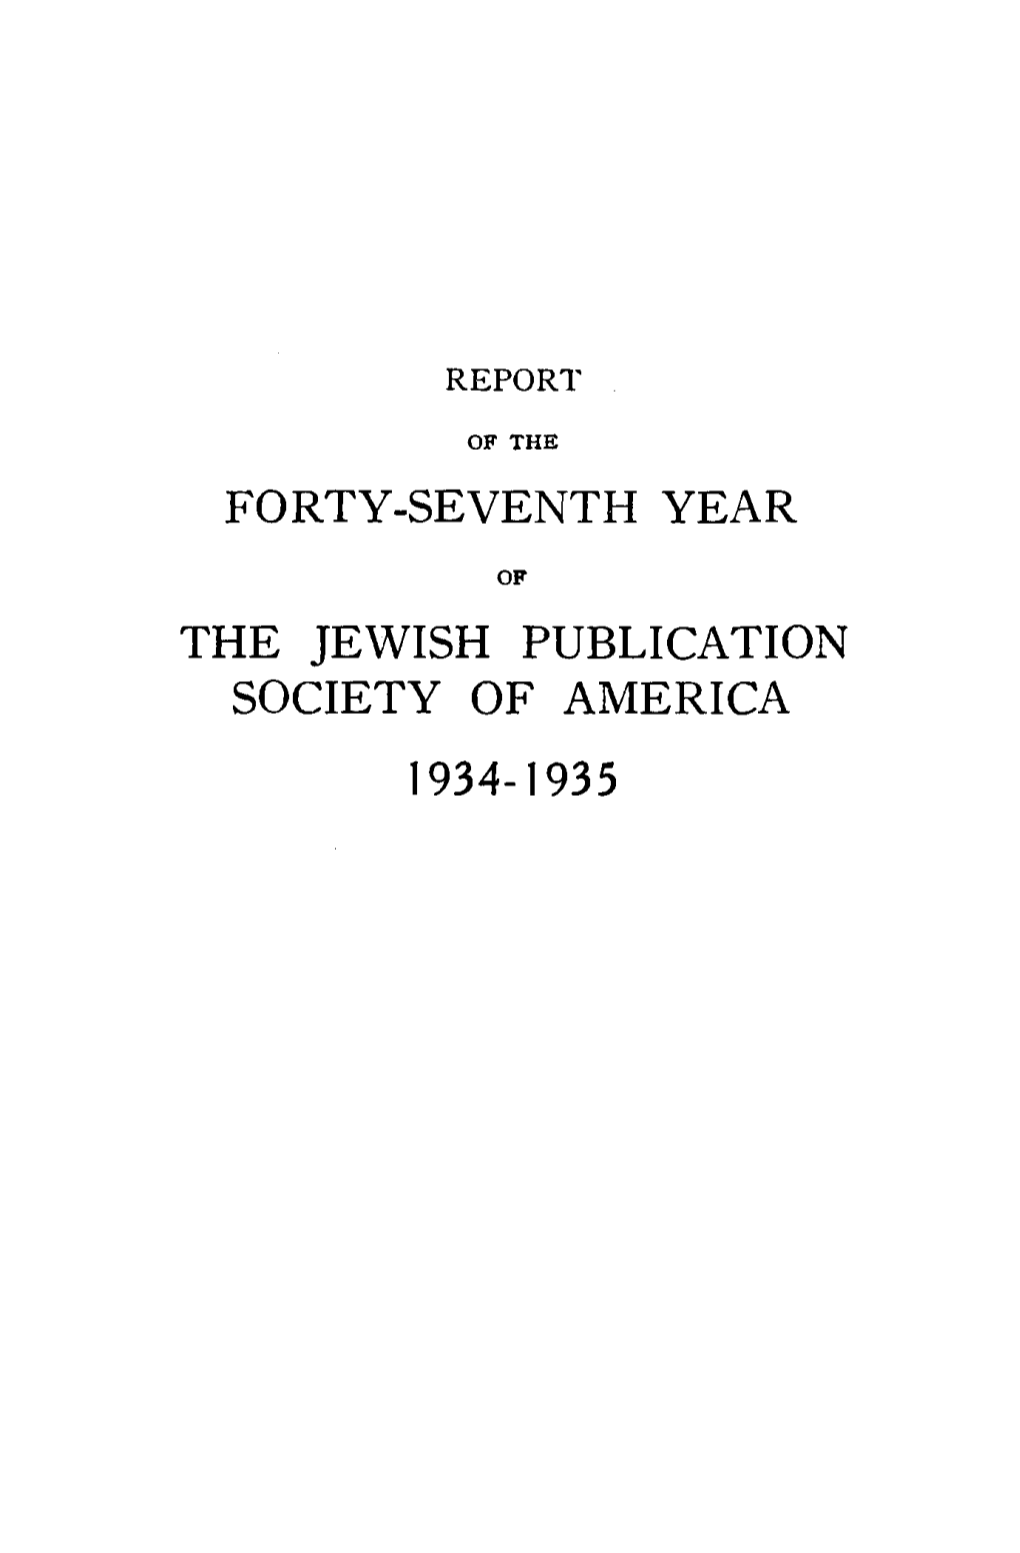 Report of the Jewish Publication Society of America (1935-1936)